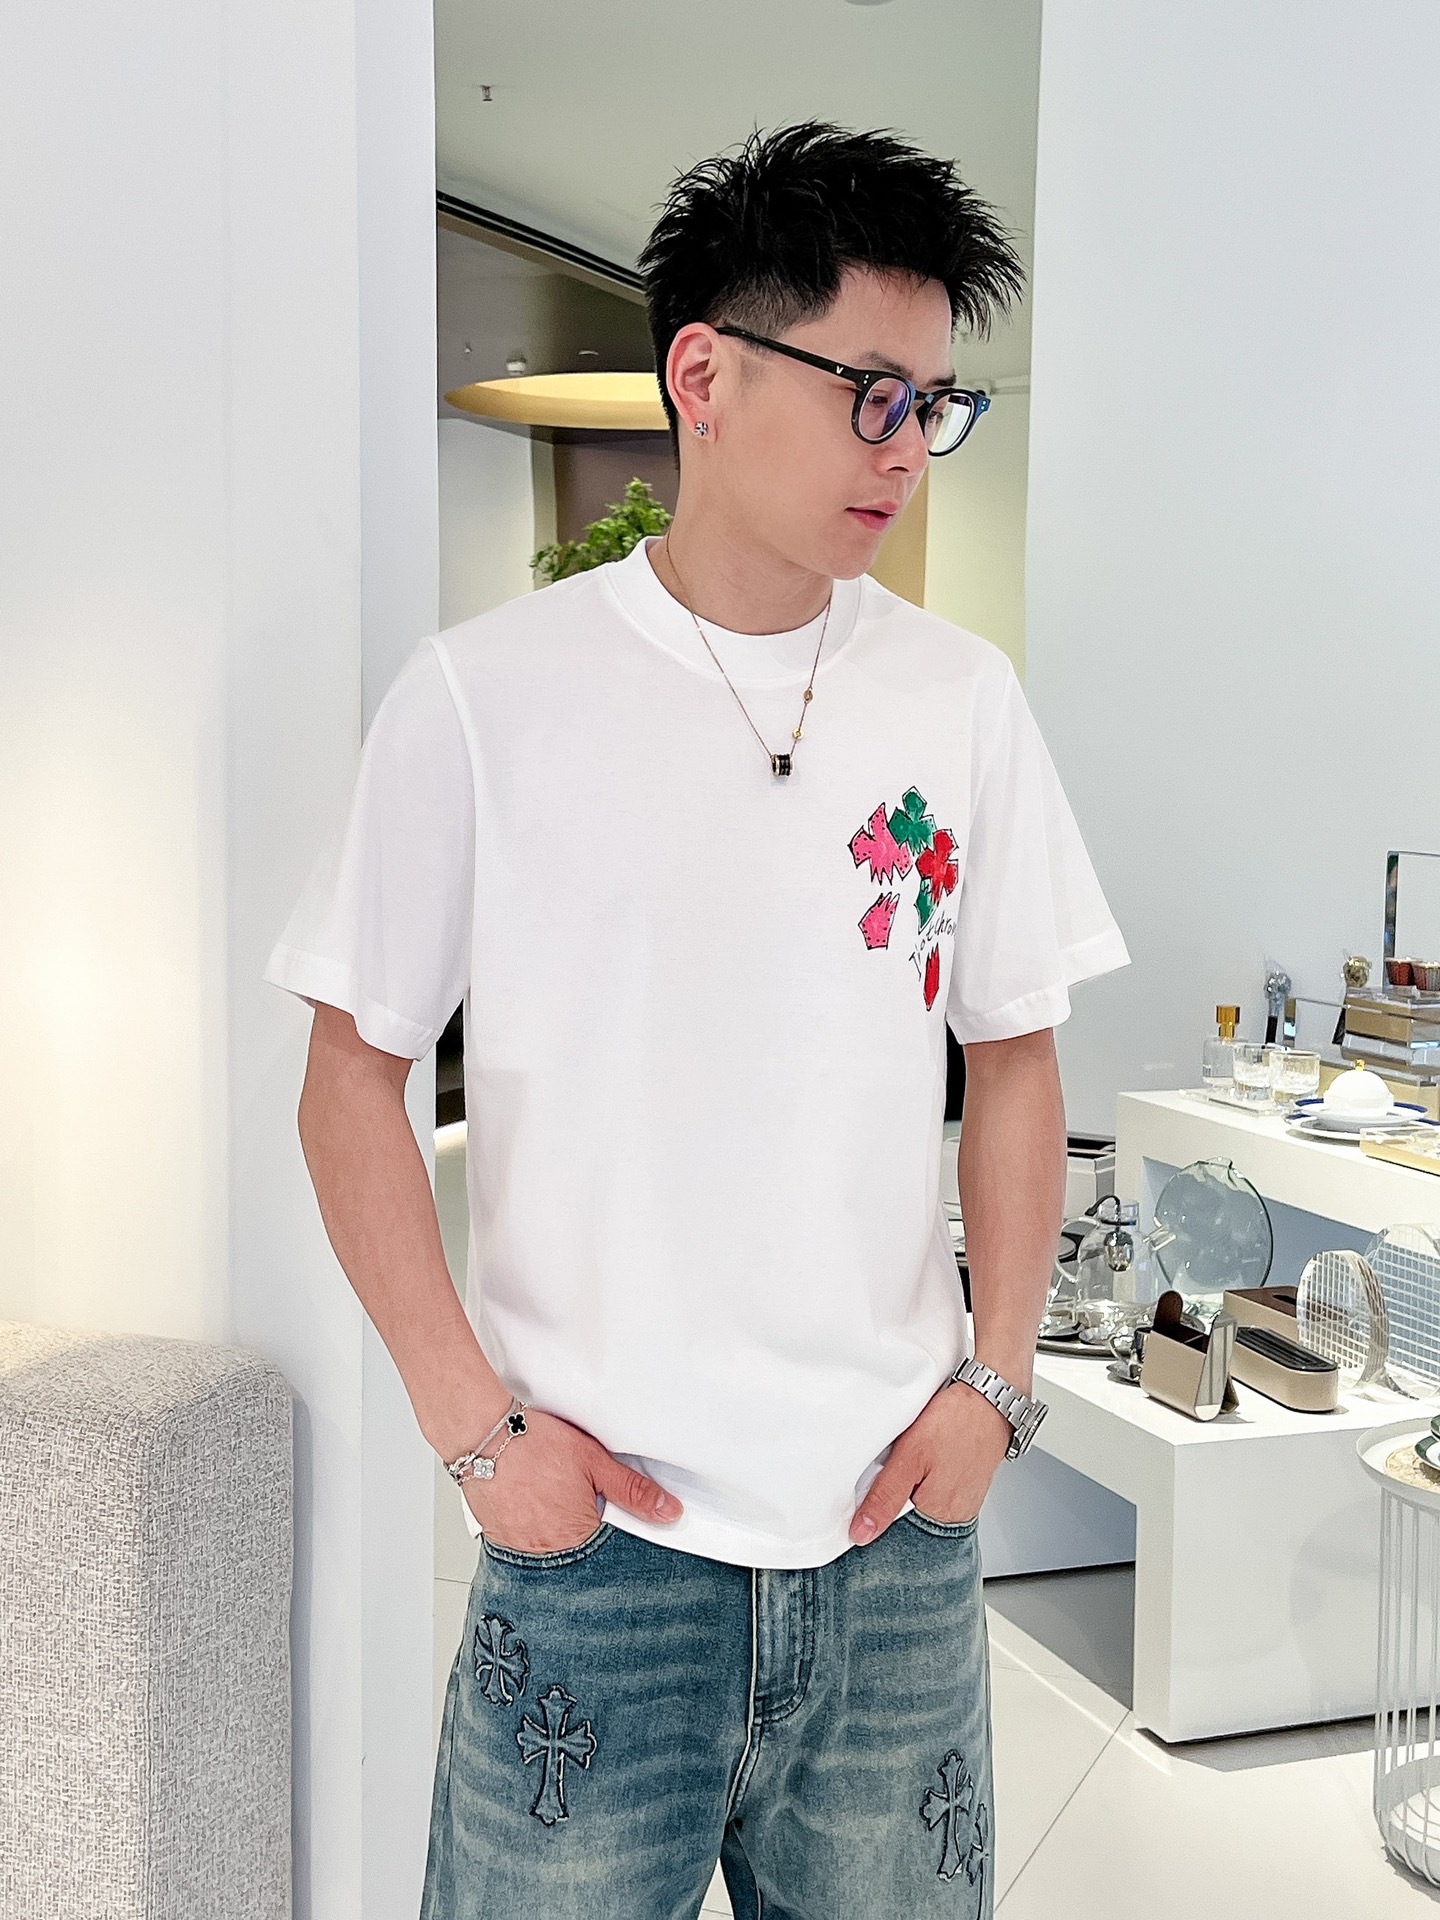 Sell Online Luxury Designer
 Chrome Hearts Clothing T-Shirt Black White Spring/Summer Collection Fashion Short Sleeve